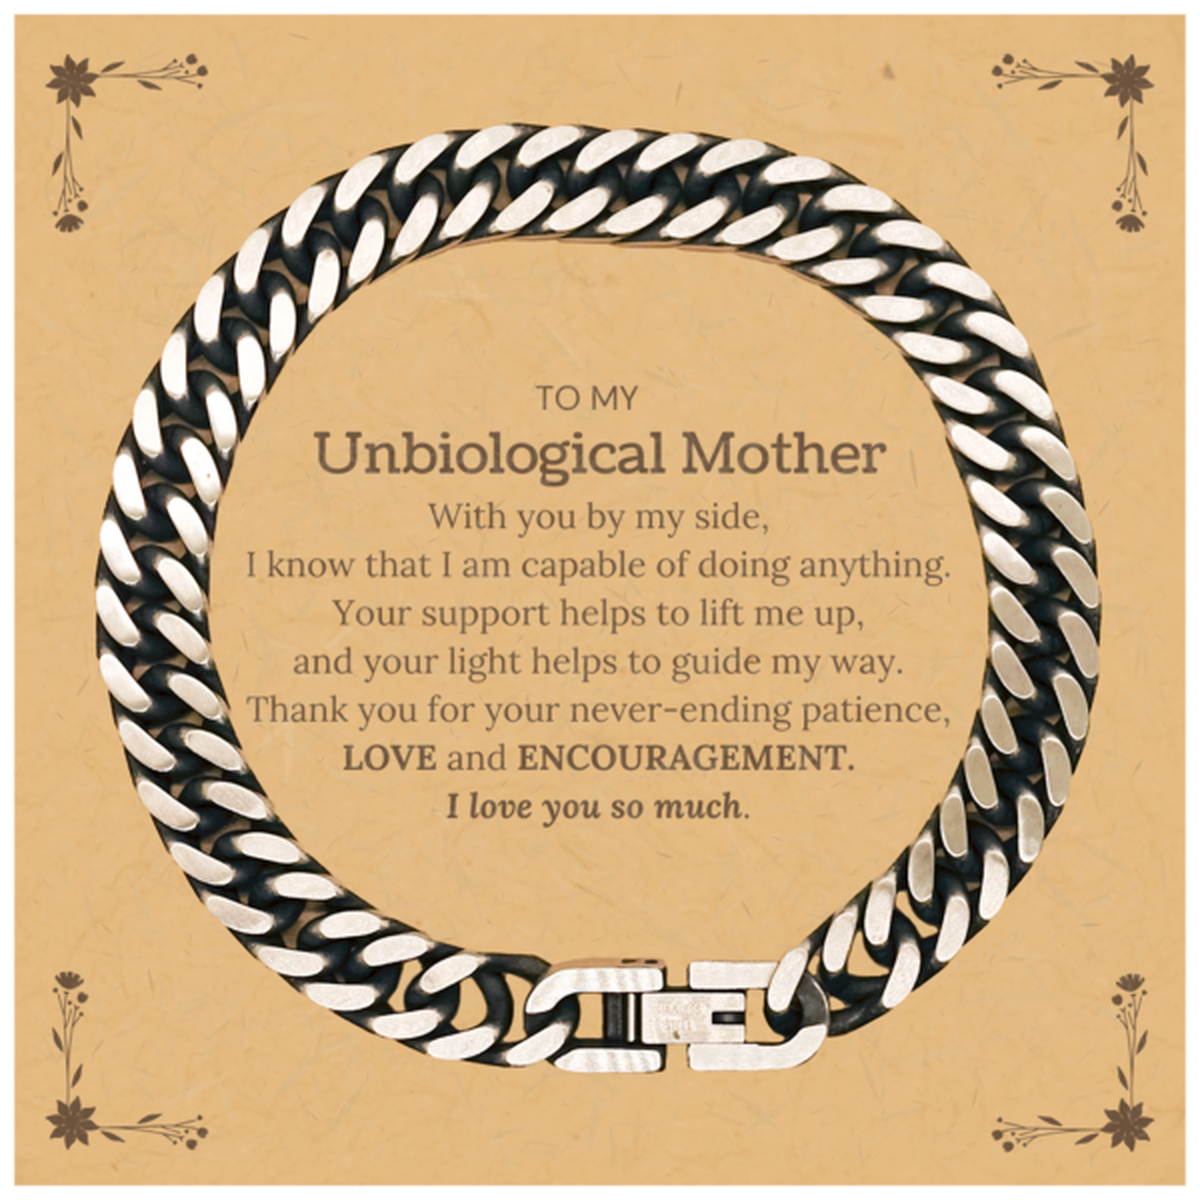 Appreciation Unbiological Mother Cuban Link Chain Bracelet Gifts, To My Unbiological Mother Birthday Christmas Wedding Keepsake Gifts for Unbiological Mother With you by my side, I know that I am capable of doing anything. I love you so much